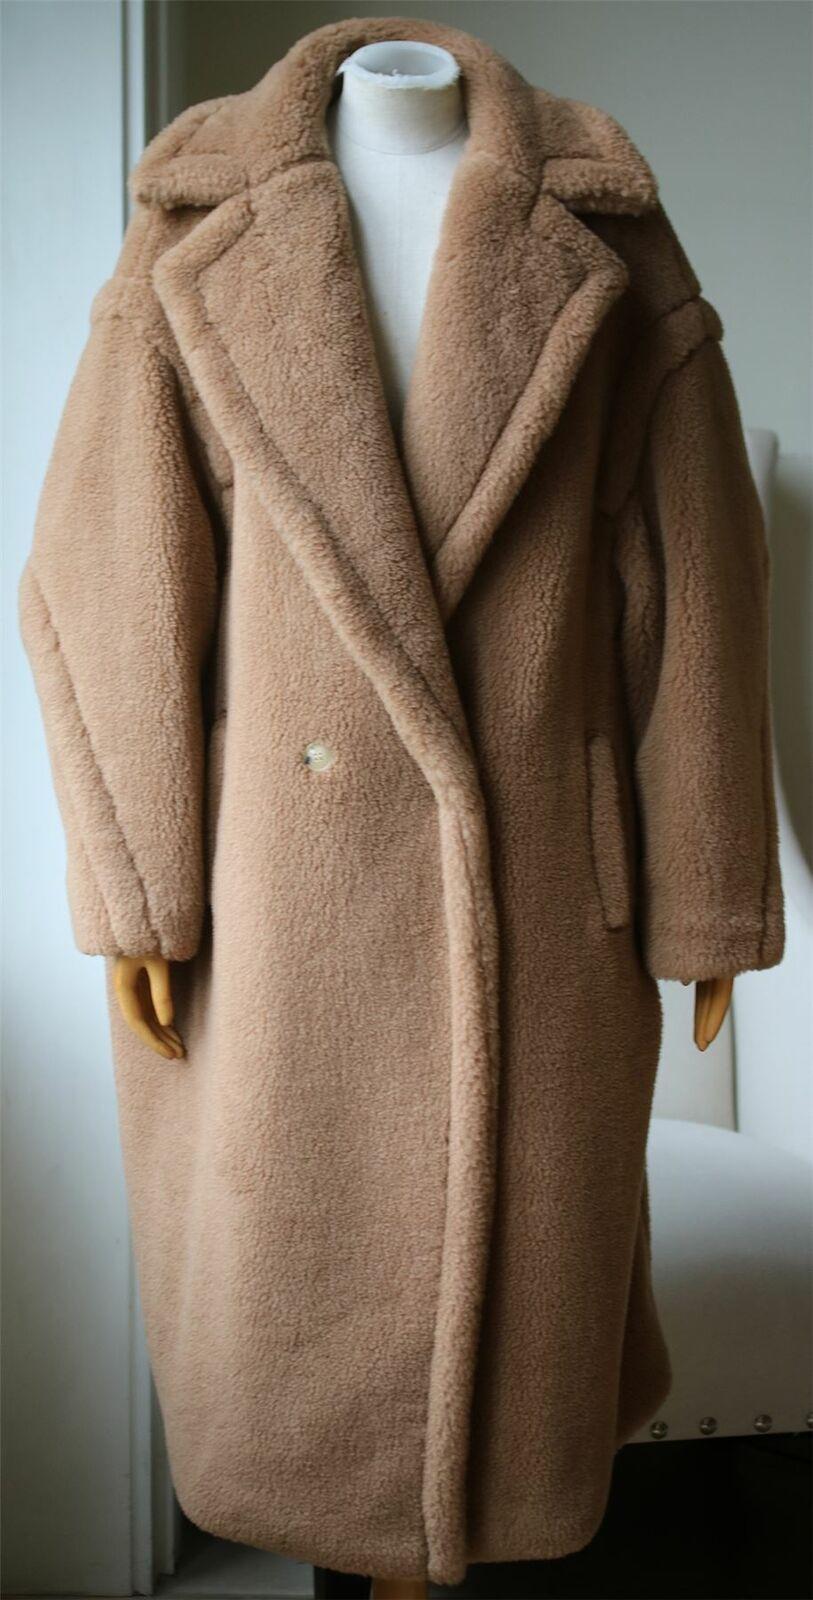 Max Mara unveiled an exhibition in Seoul last year dedicated to one of its best-loved signatures - 'Coats!'. This oversized 'Teddy Bear' style is made from fluffy camel hair woven with touches of silk for a super soft handle. The notched lapels and